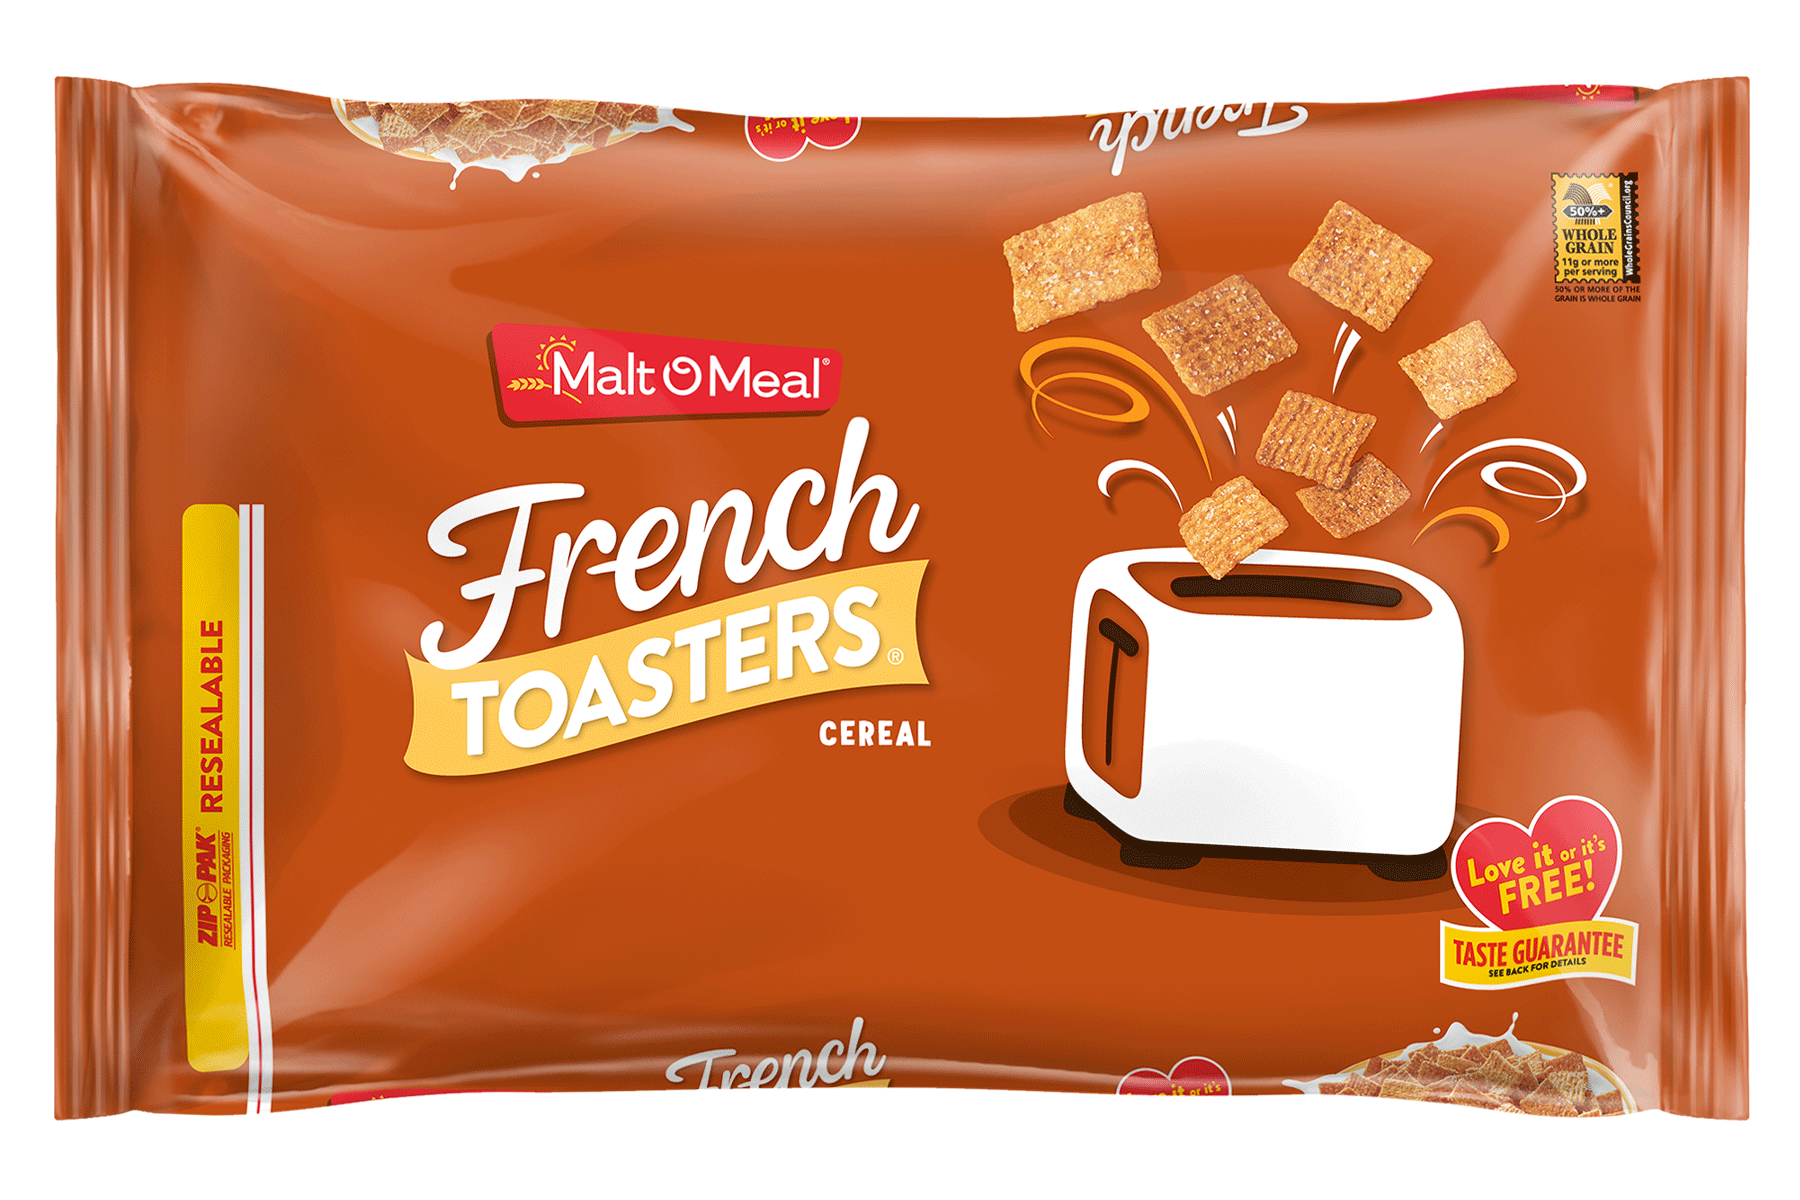 New Malt-O-Meal French Toasters Cereal Bag